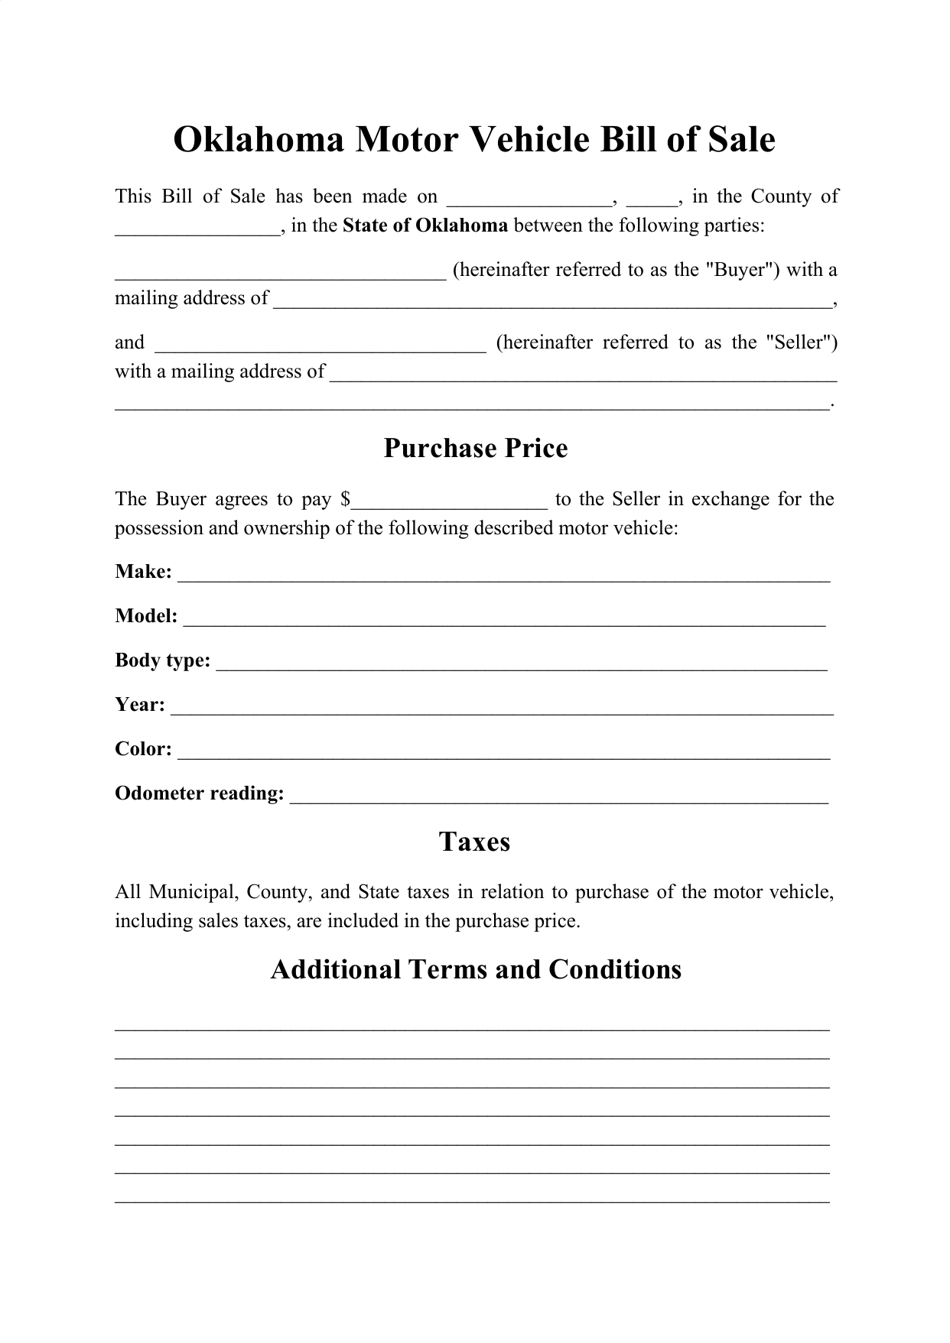 Motor Vehicle Bill of Sale Form - Oklahoma, Page 1